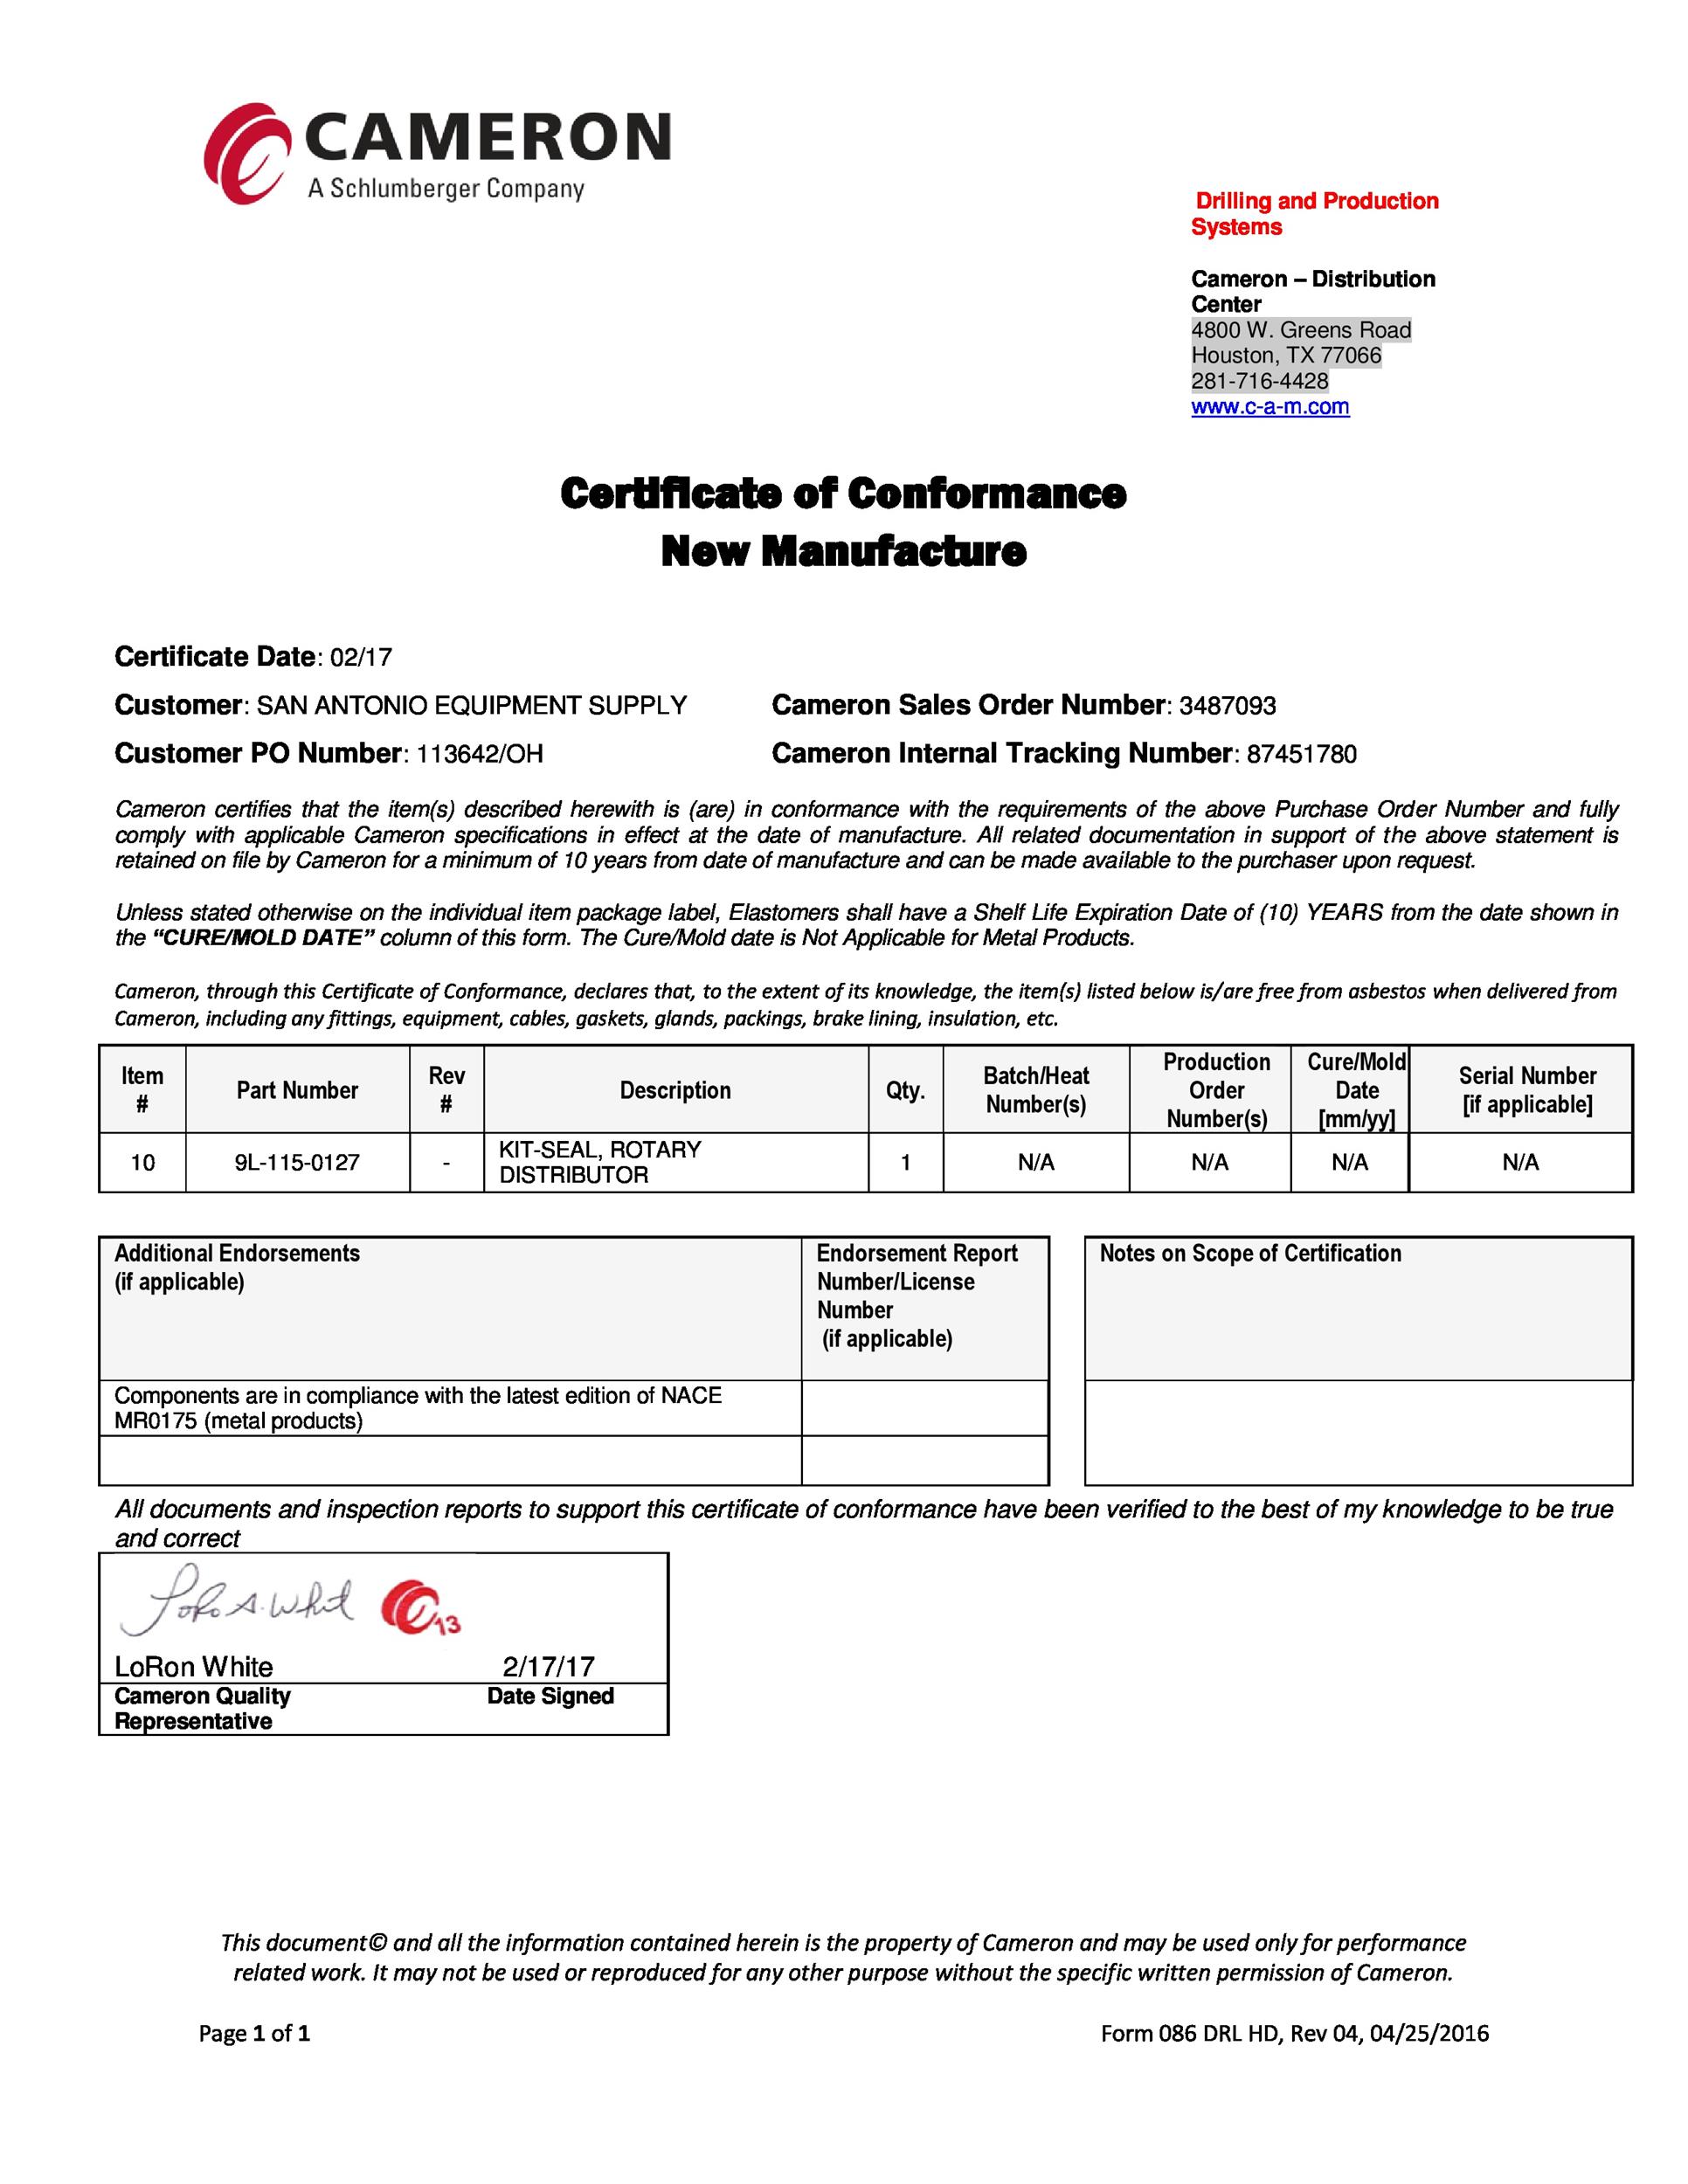 40 Free Certificate of Conformance Templates & Forms ᐅ TemplateLab